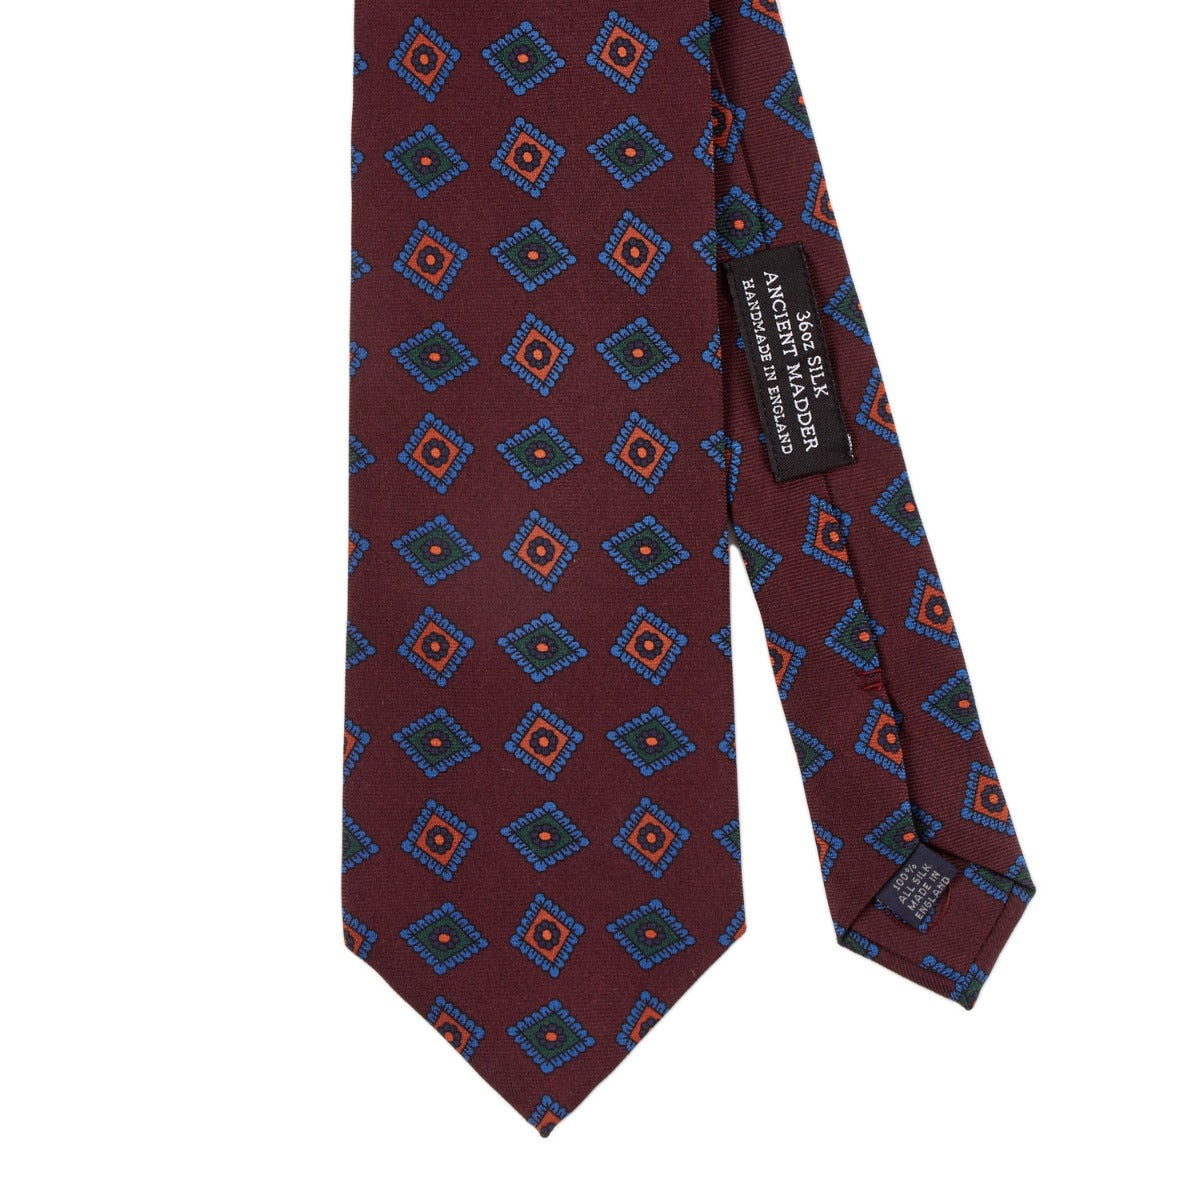 A high-quality handmade Sovereign Grade Burgundy Art Deco Ancient Madder Silk Tie with a blue and red pattern, made in the United Kingdom, available at KirbyAllison.com.